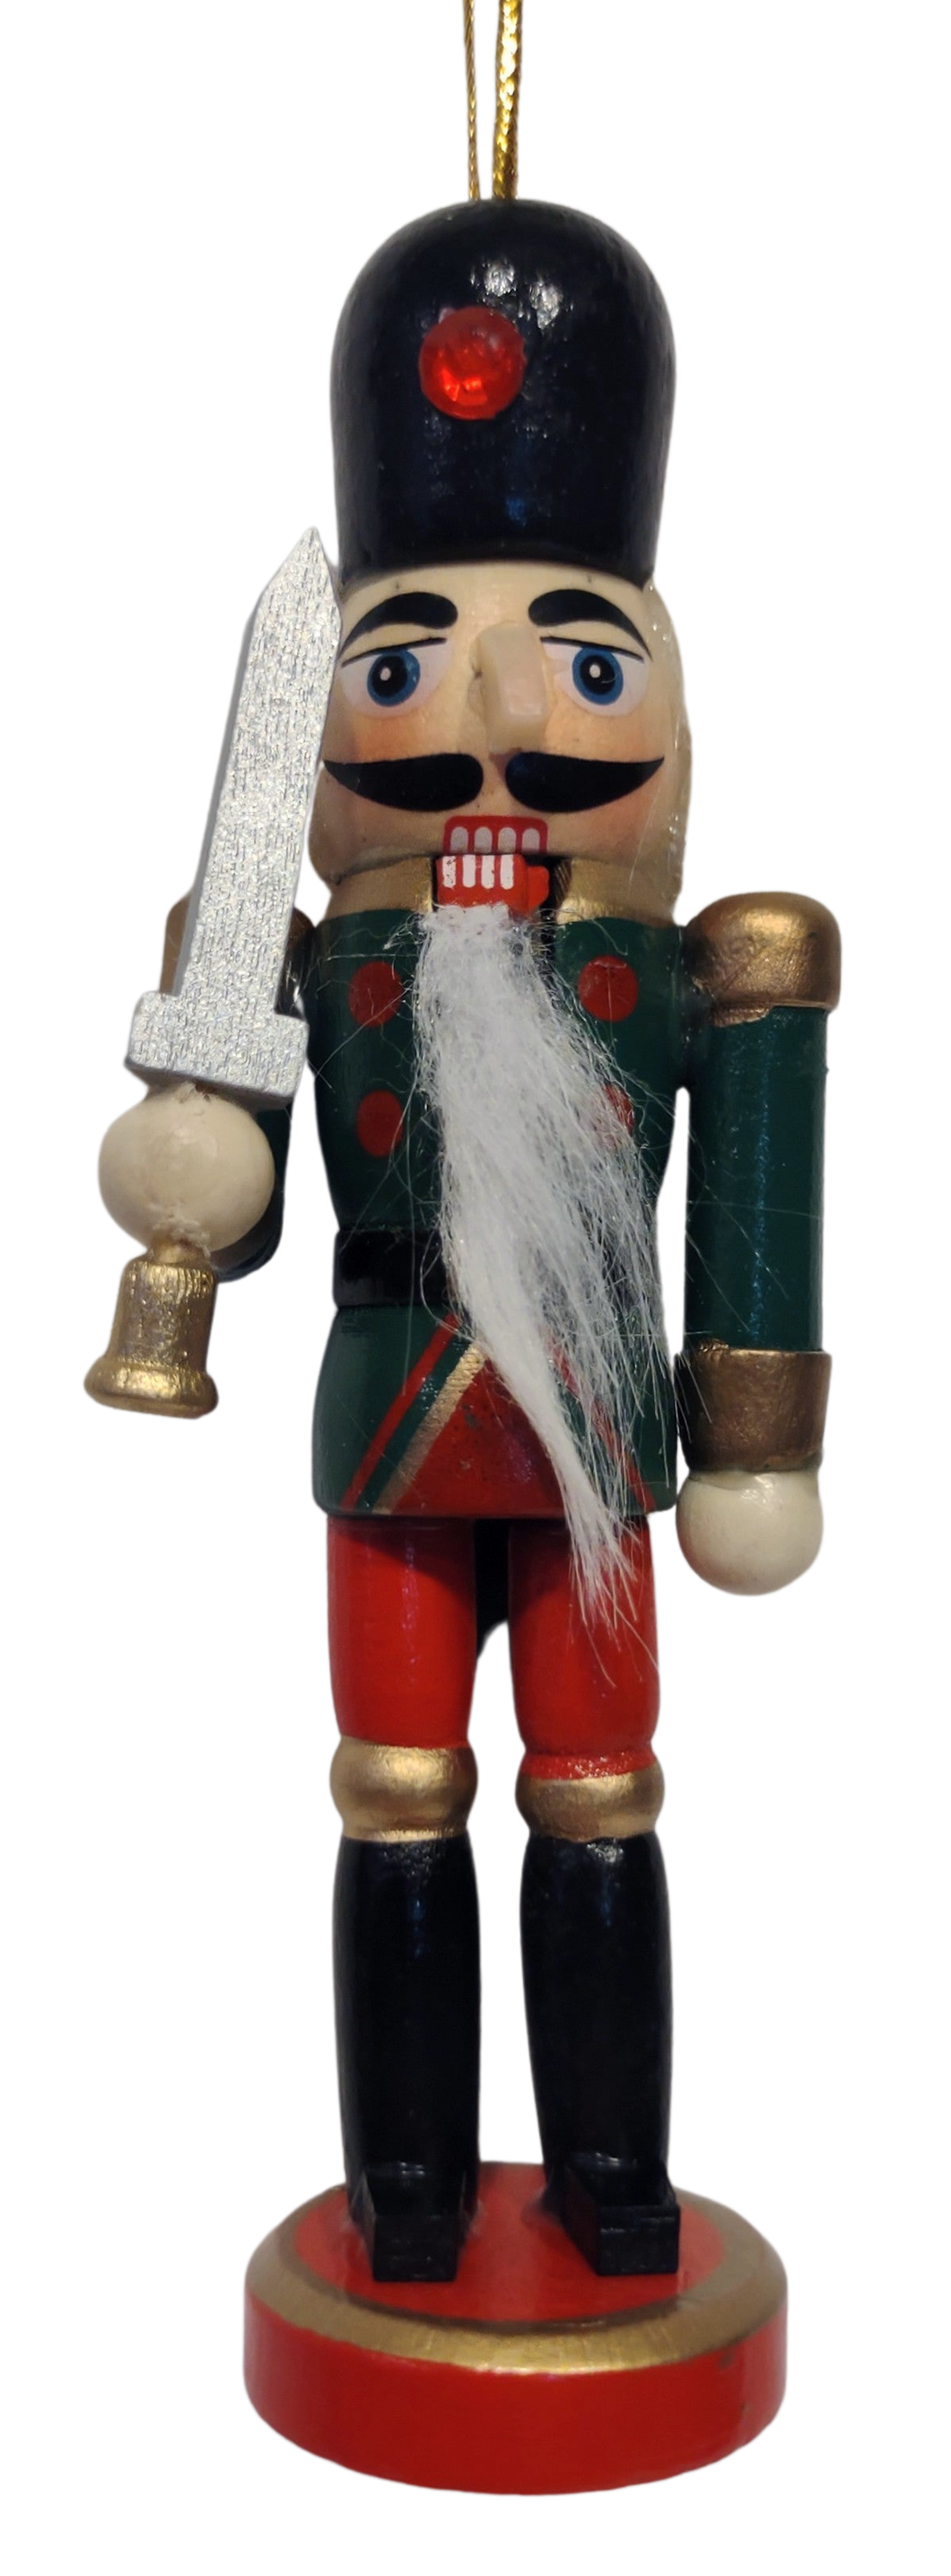 Wooden Green/Red Nutcracker Ornament with Sword  5